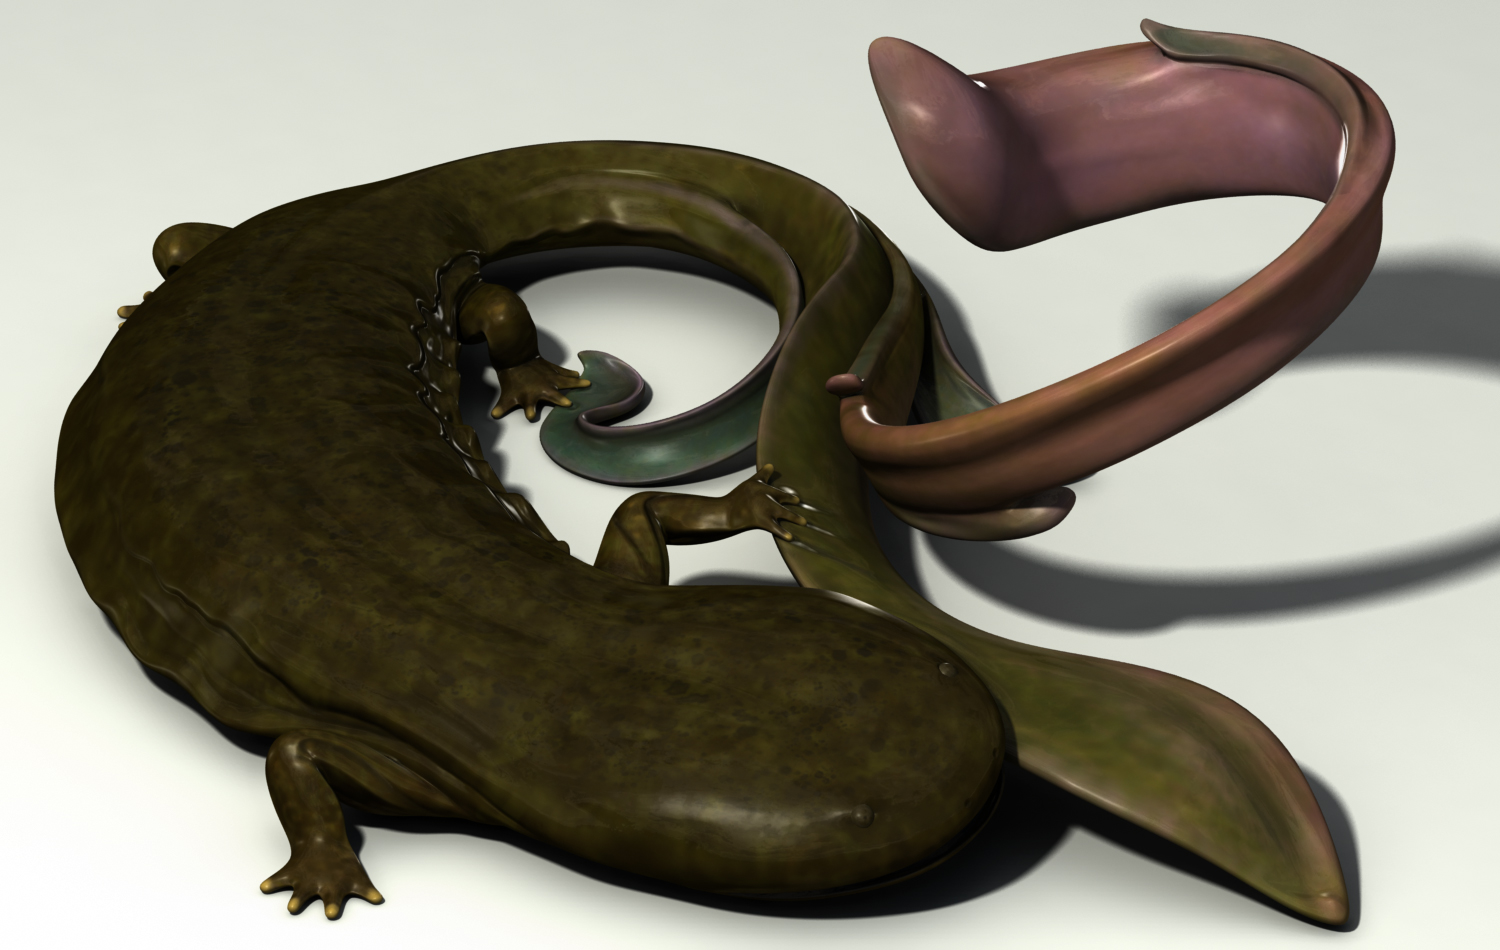  Florid Hellbender Salamander. Used Maya for base mesh and ZBrush for sculpting and texture painting. More about this project  here .    